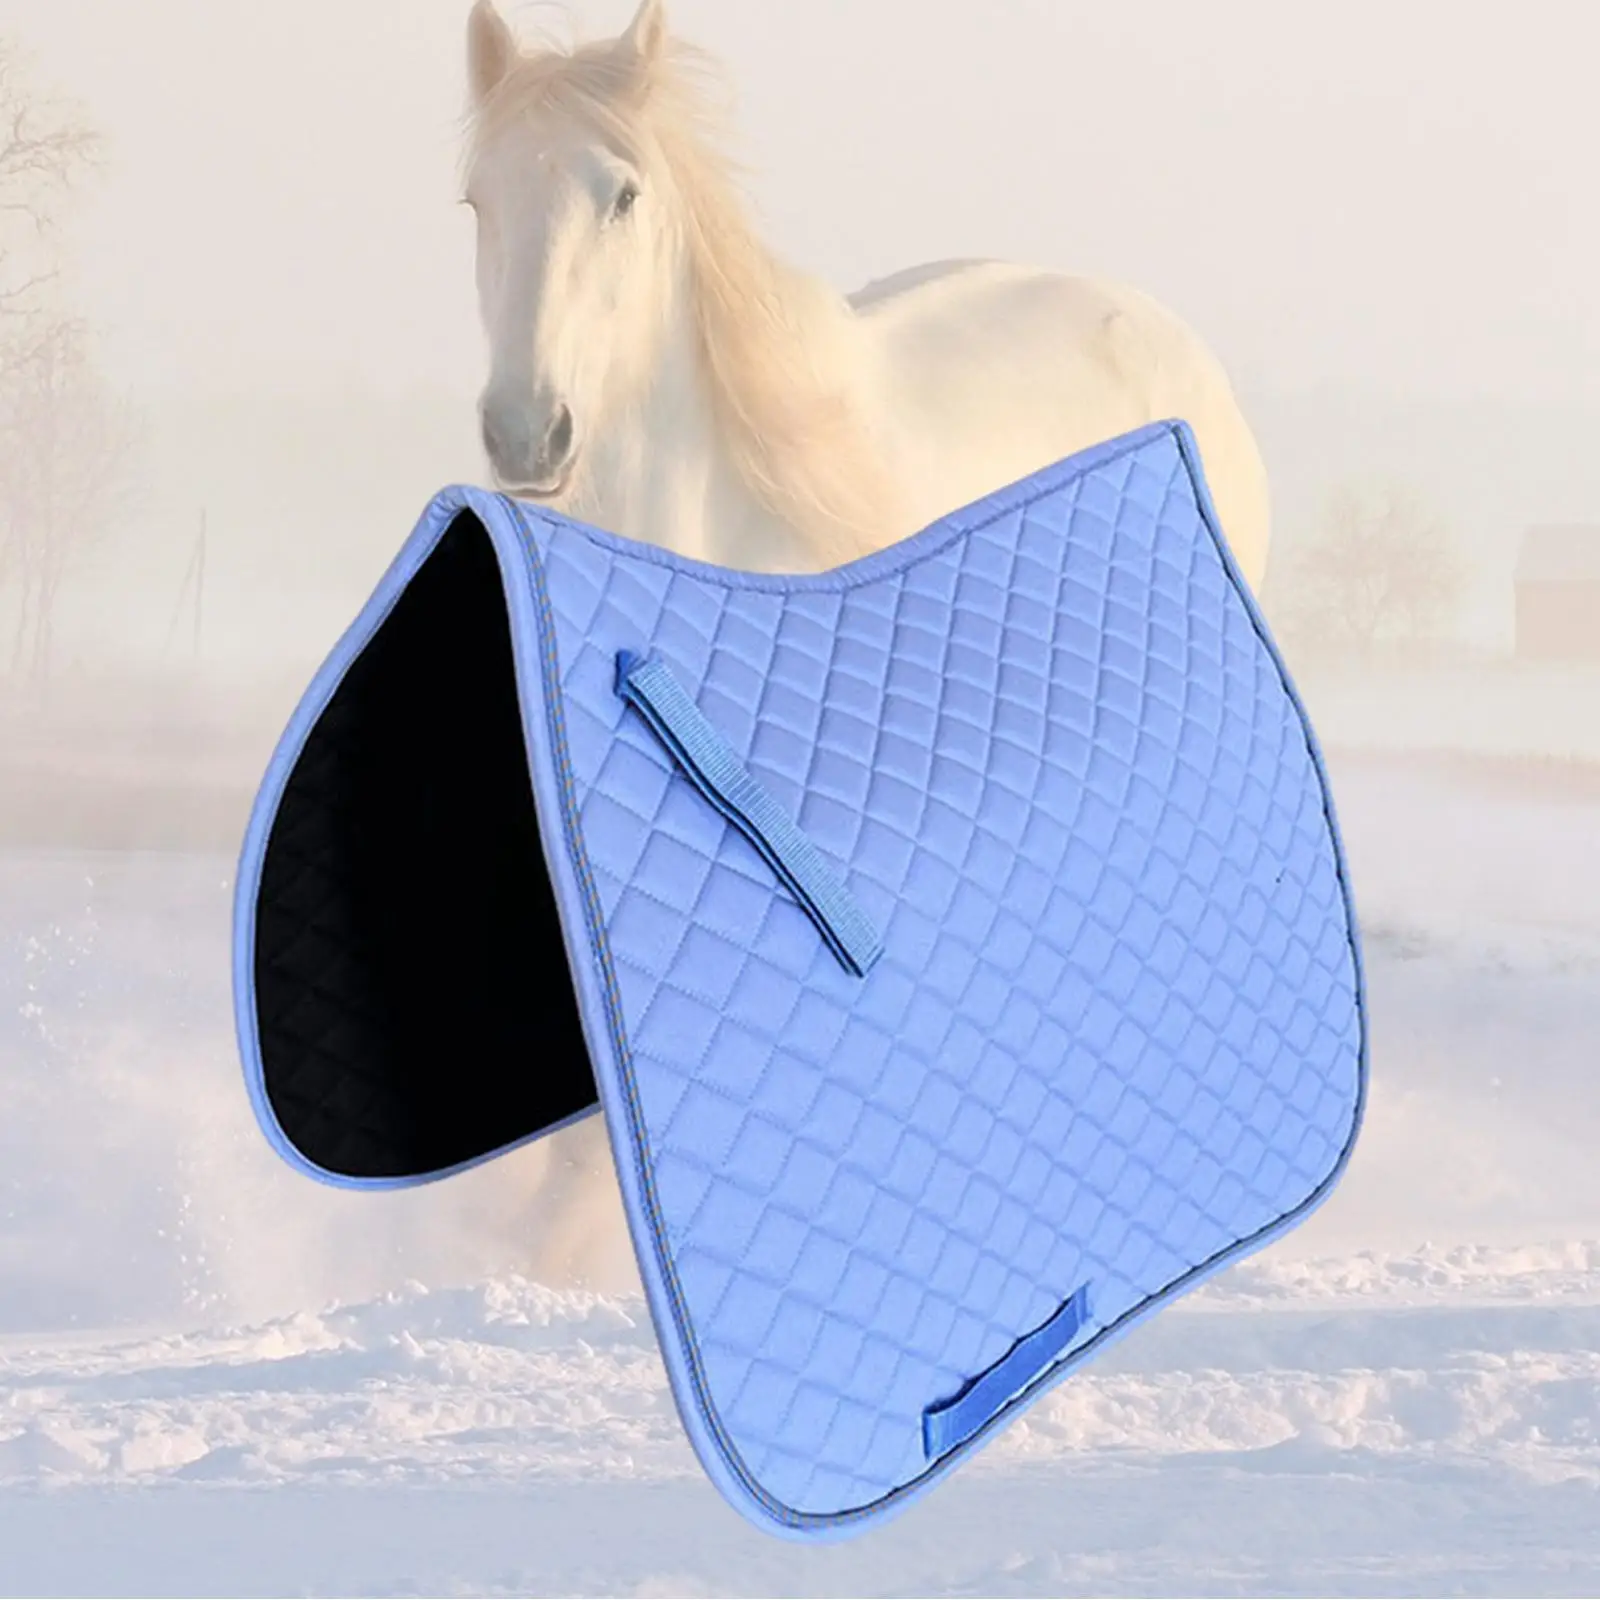 Horse Saddle Pad Thickening Riding Padding Comfortable Equestrian Riding Equipment Soft Protection Portable Nonslip Dressage Pad